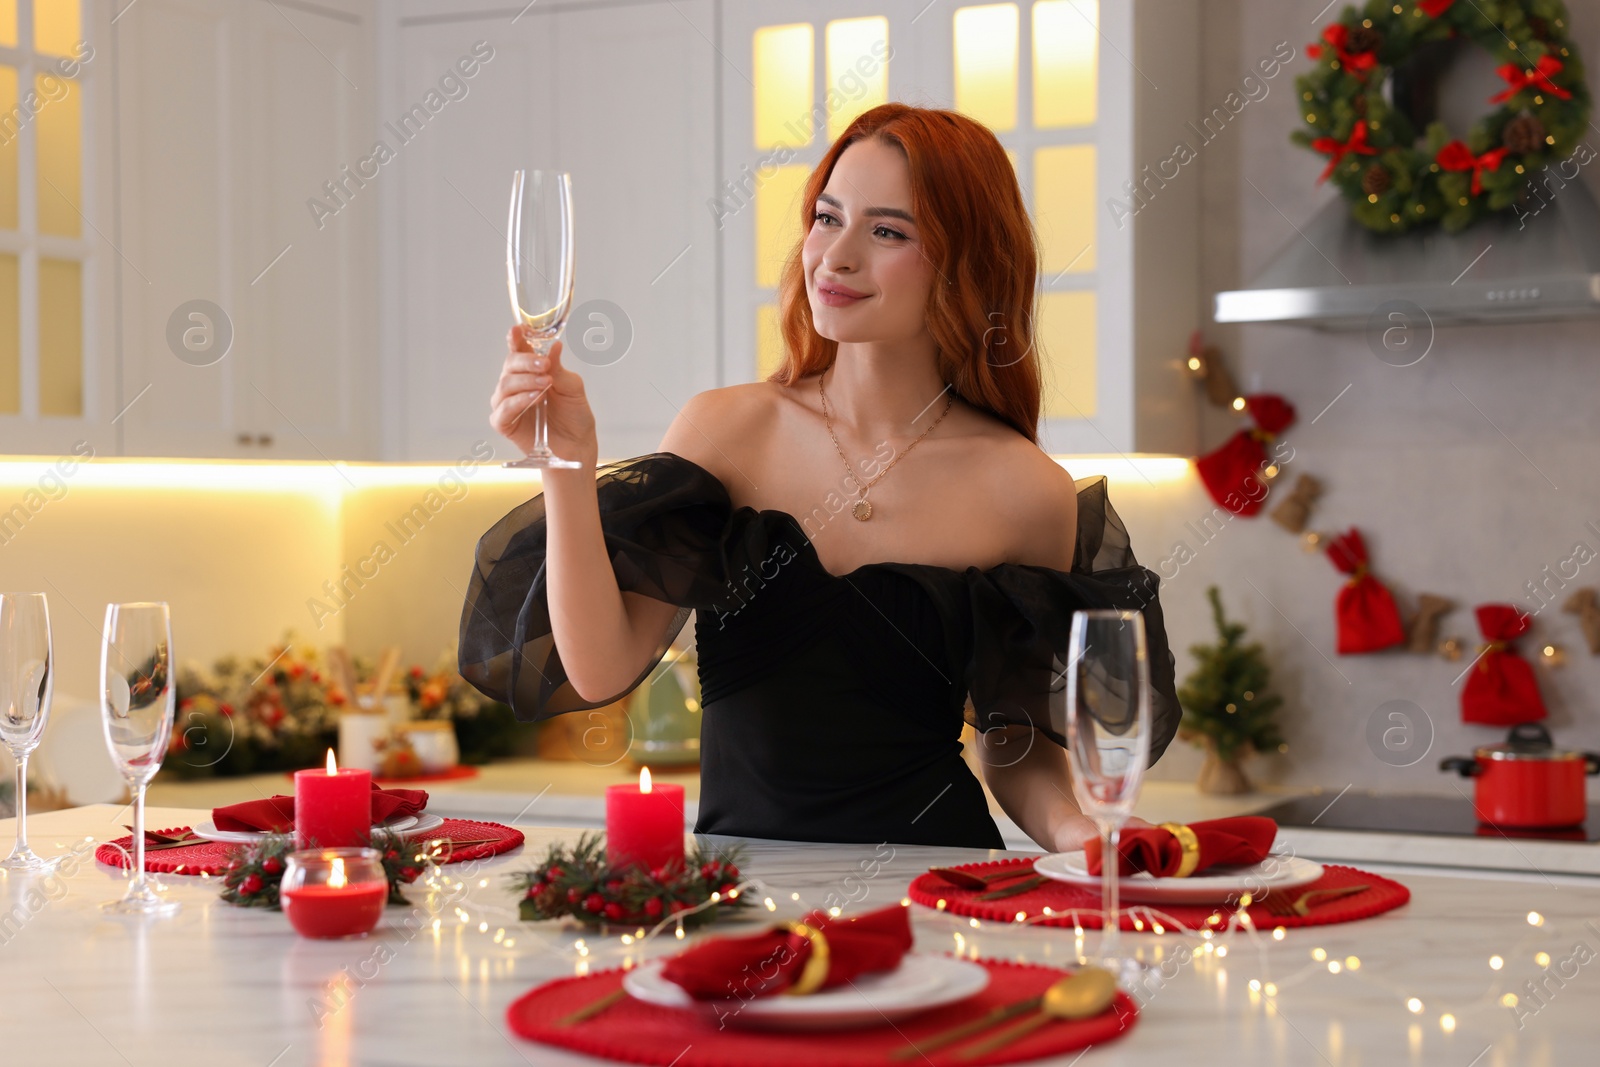 Photo of Beautiful young woman setting table for Christmas celebration in kitchen